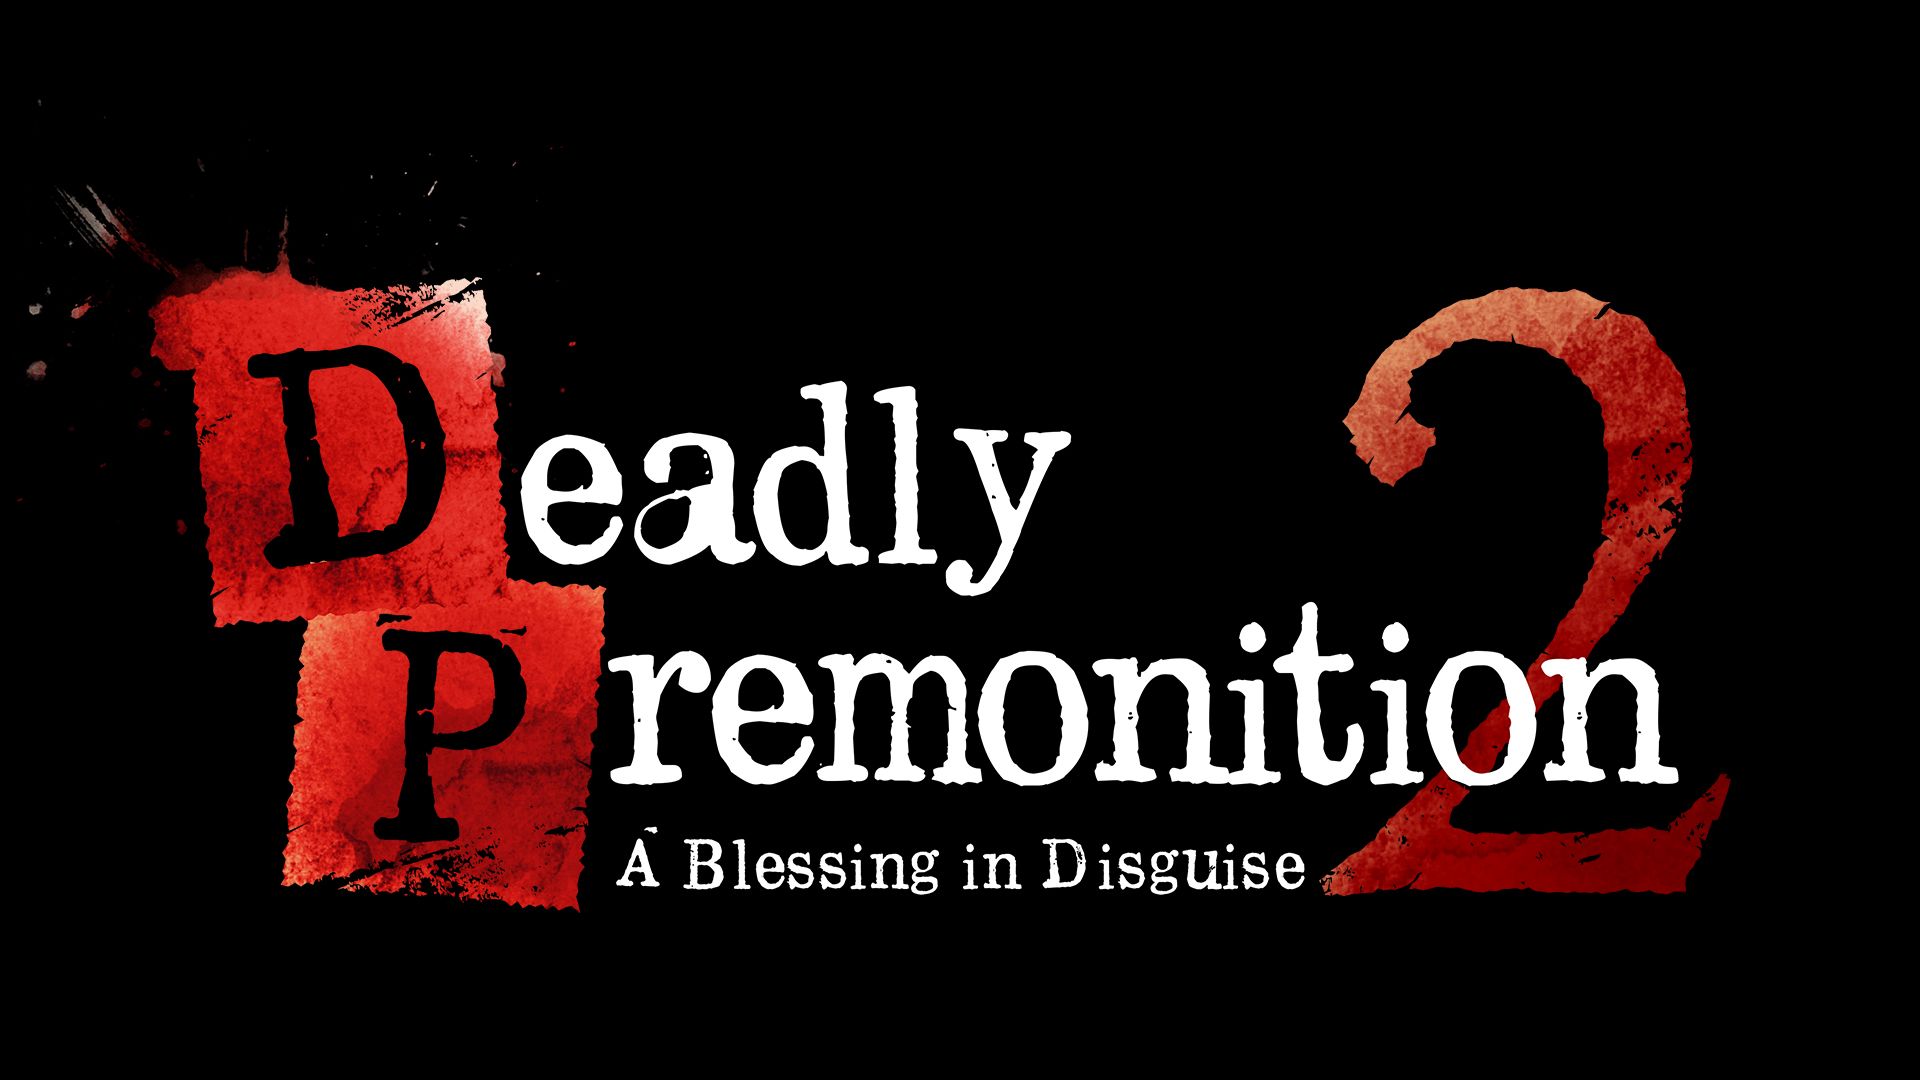 free download deadly premonition 2 a blessing in disguise review